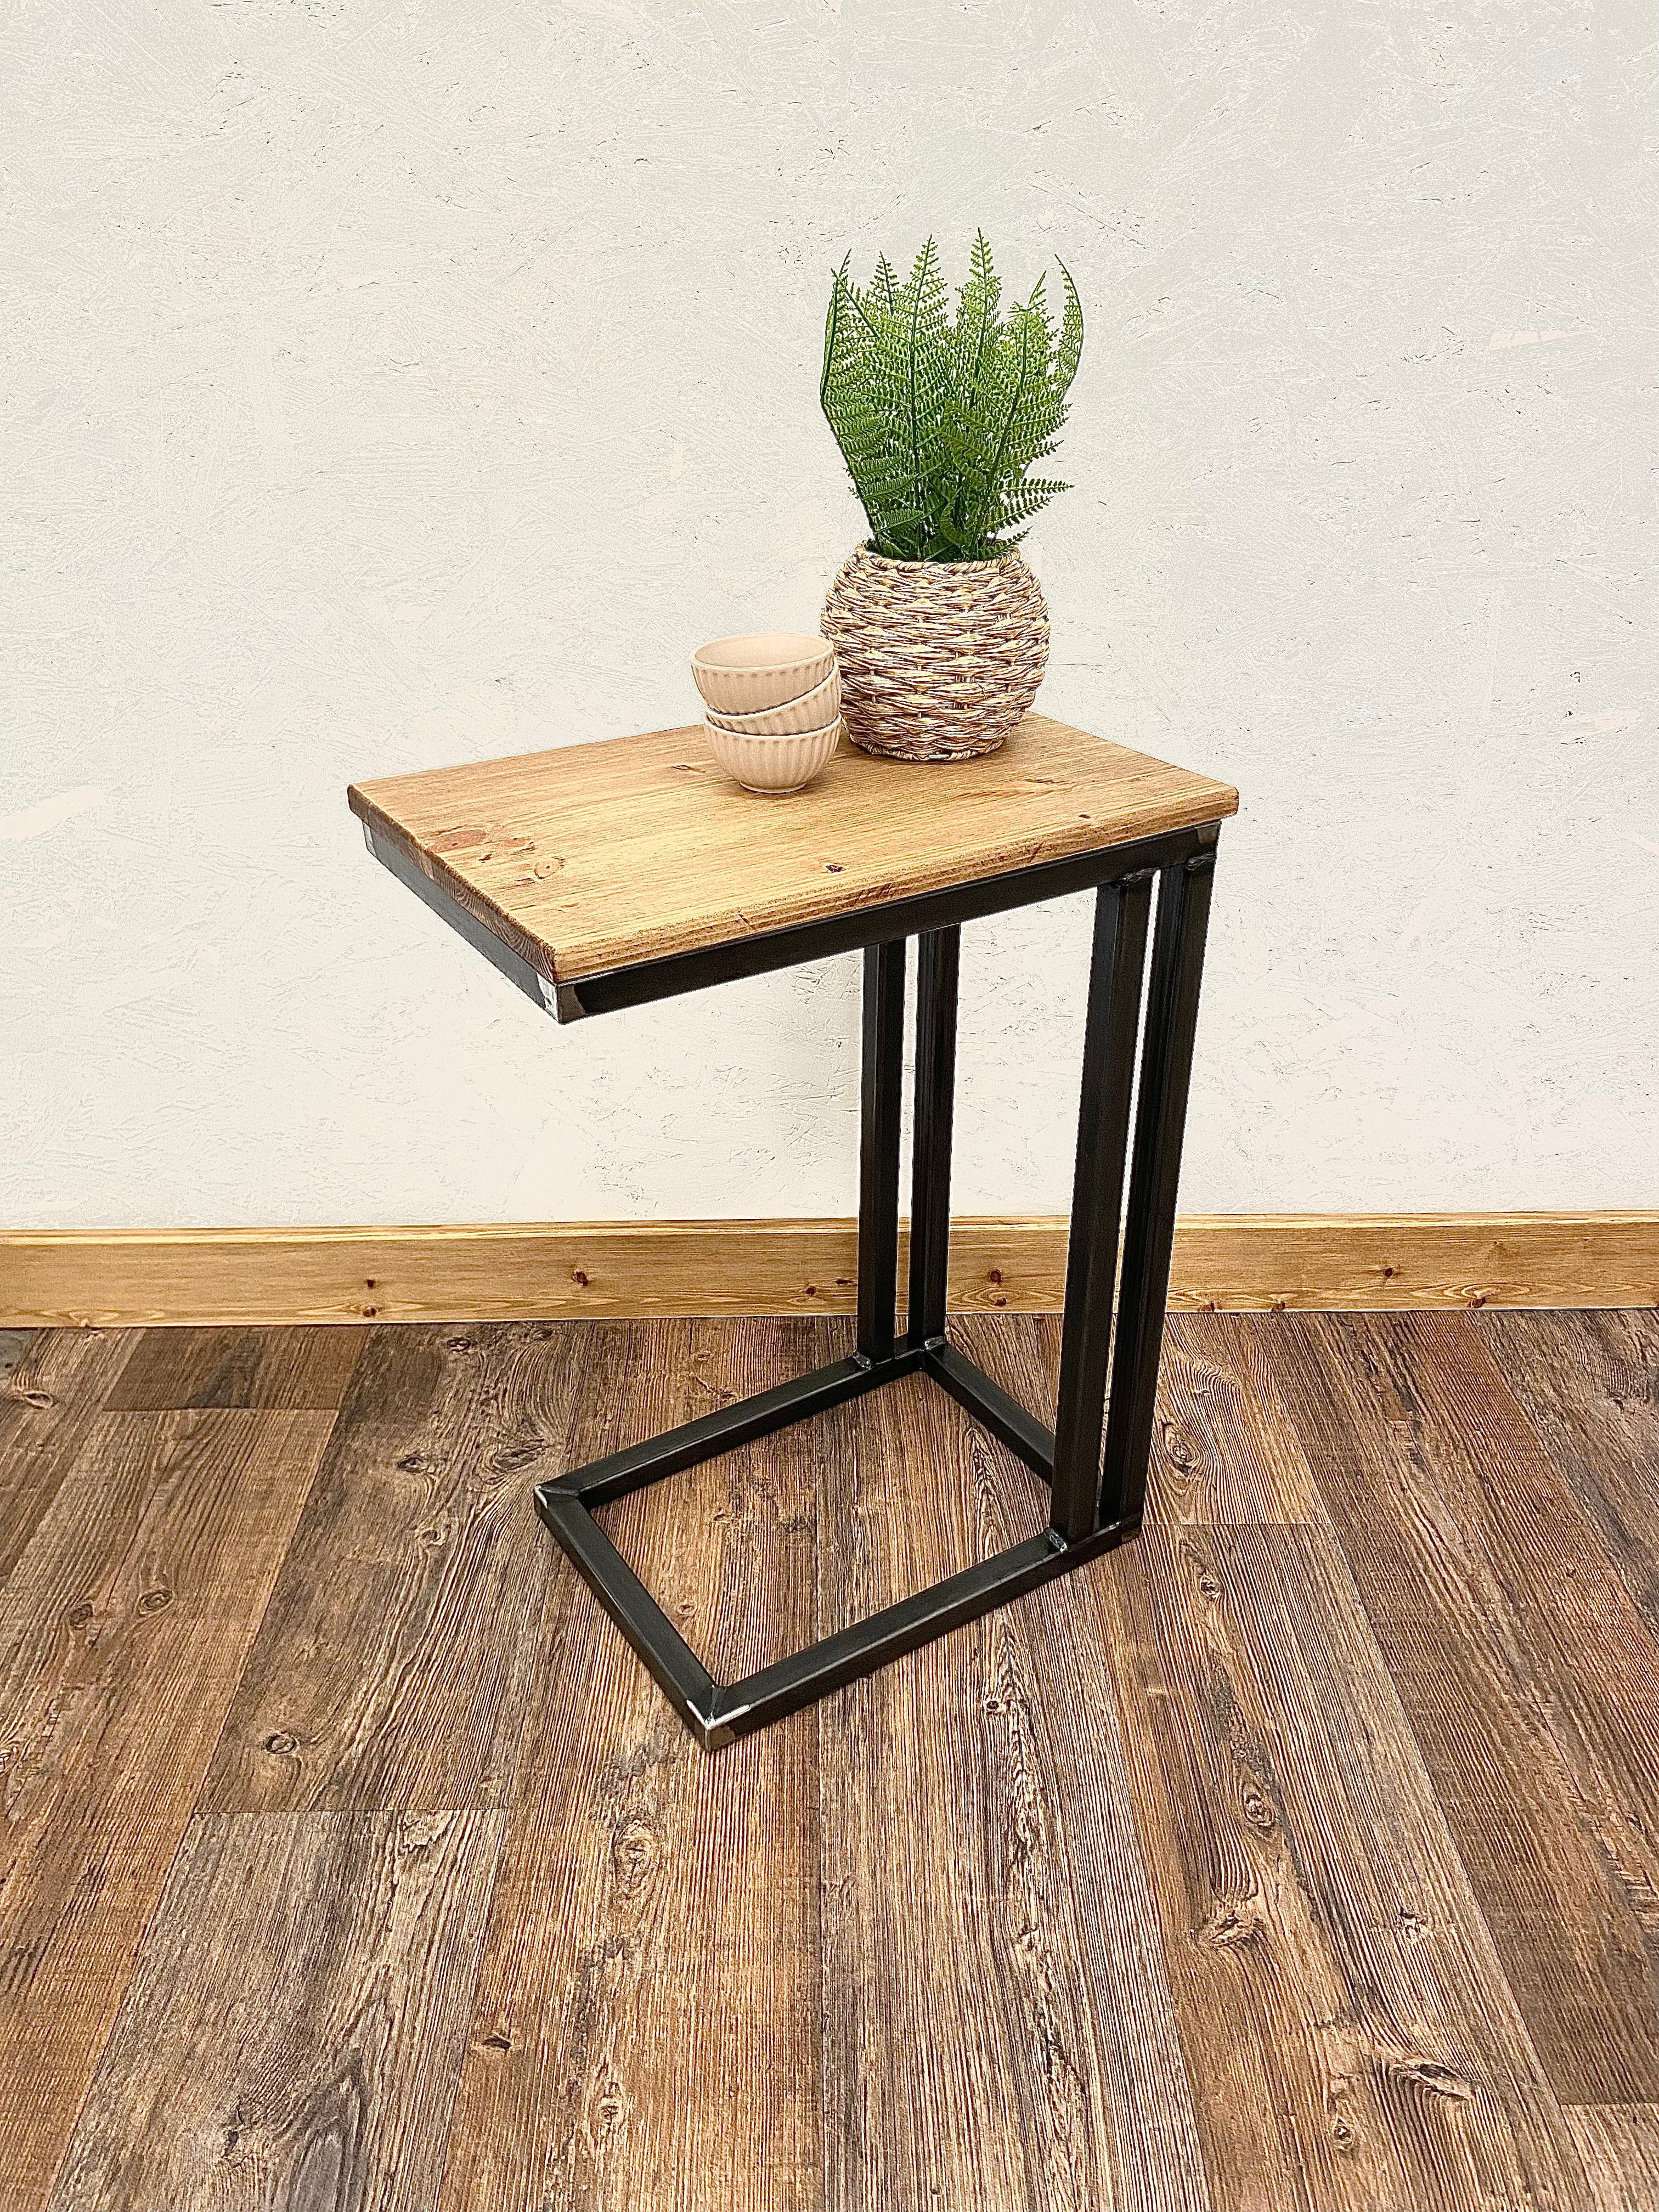 Rustic C Shaped Side table - Sofa table - Laptop table C shaped laptop table RSD Furniture   